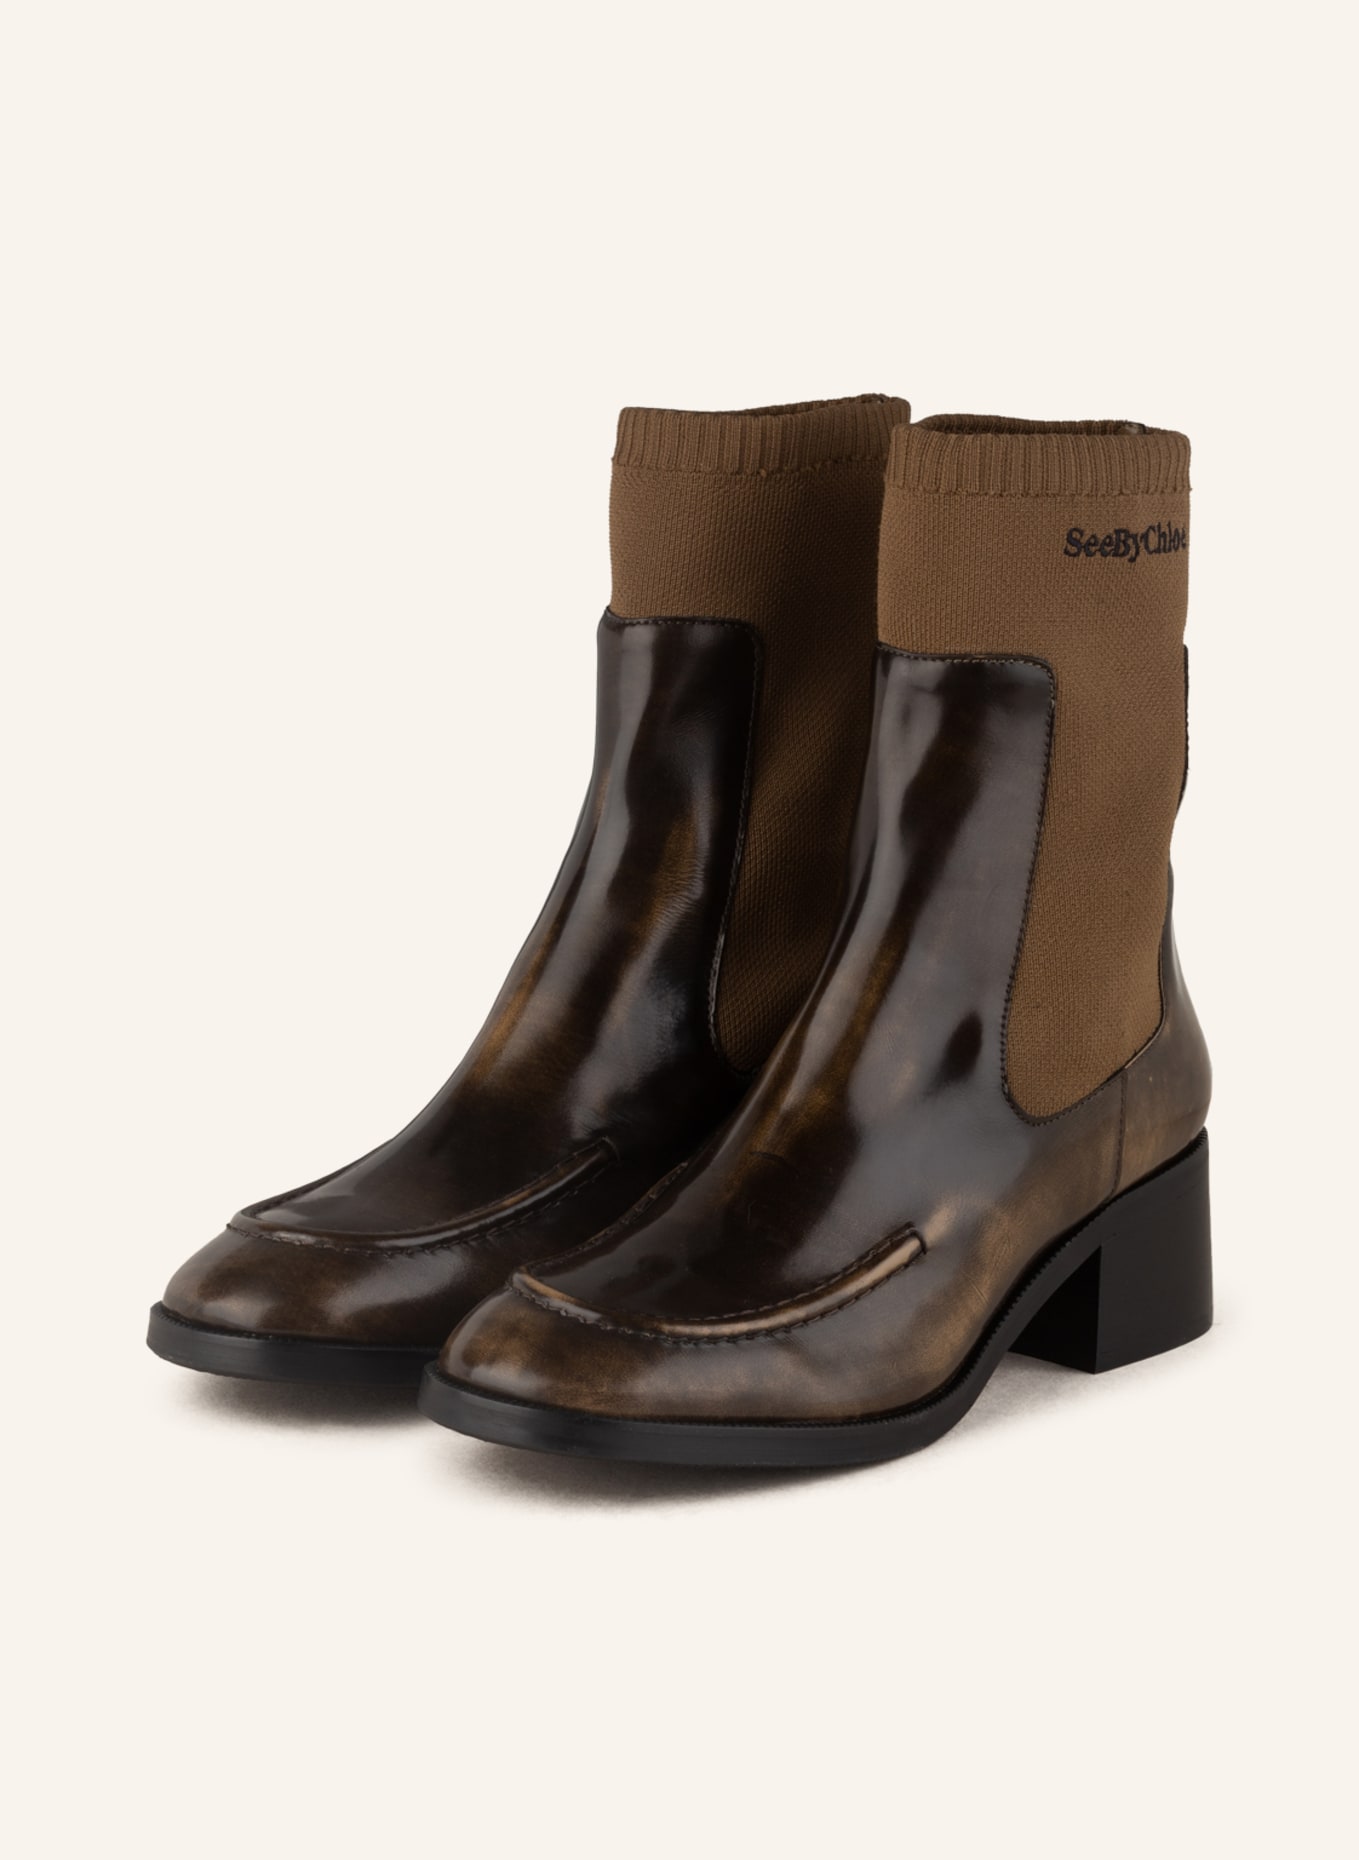 SEE BY CHLOÉ Chelsea-Boots WENDY, Farbe: 110/415 Olive (Bild 1)